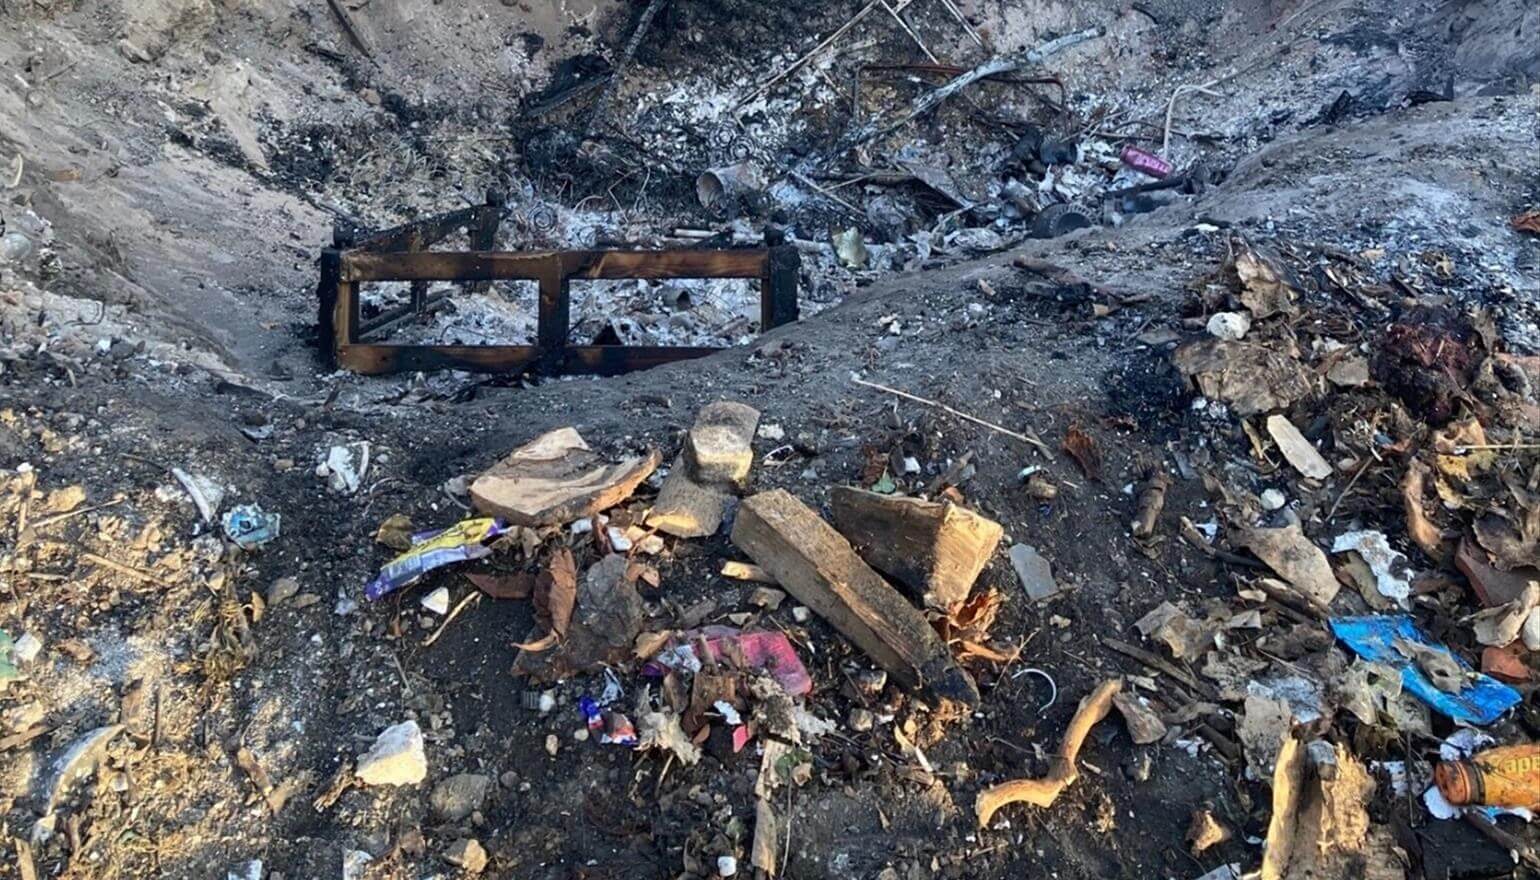 Waste removal business owner prosecuted for burning rubbish